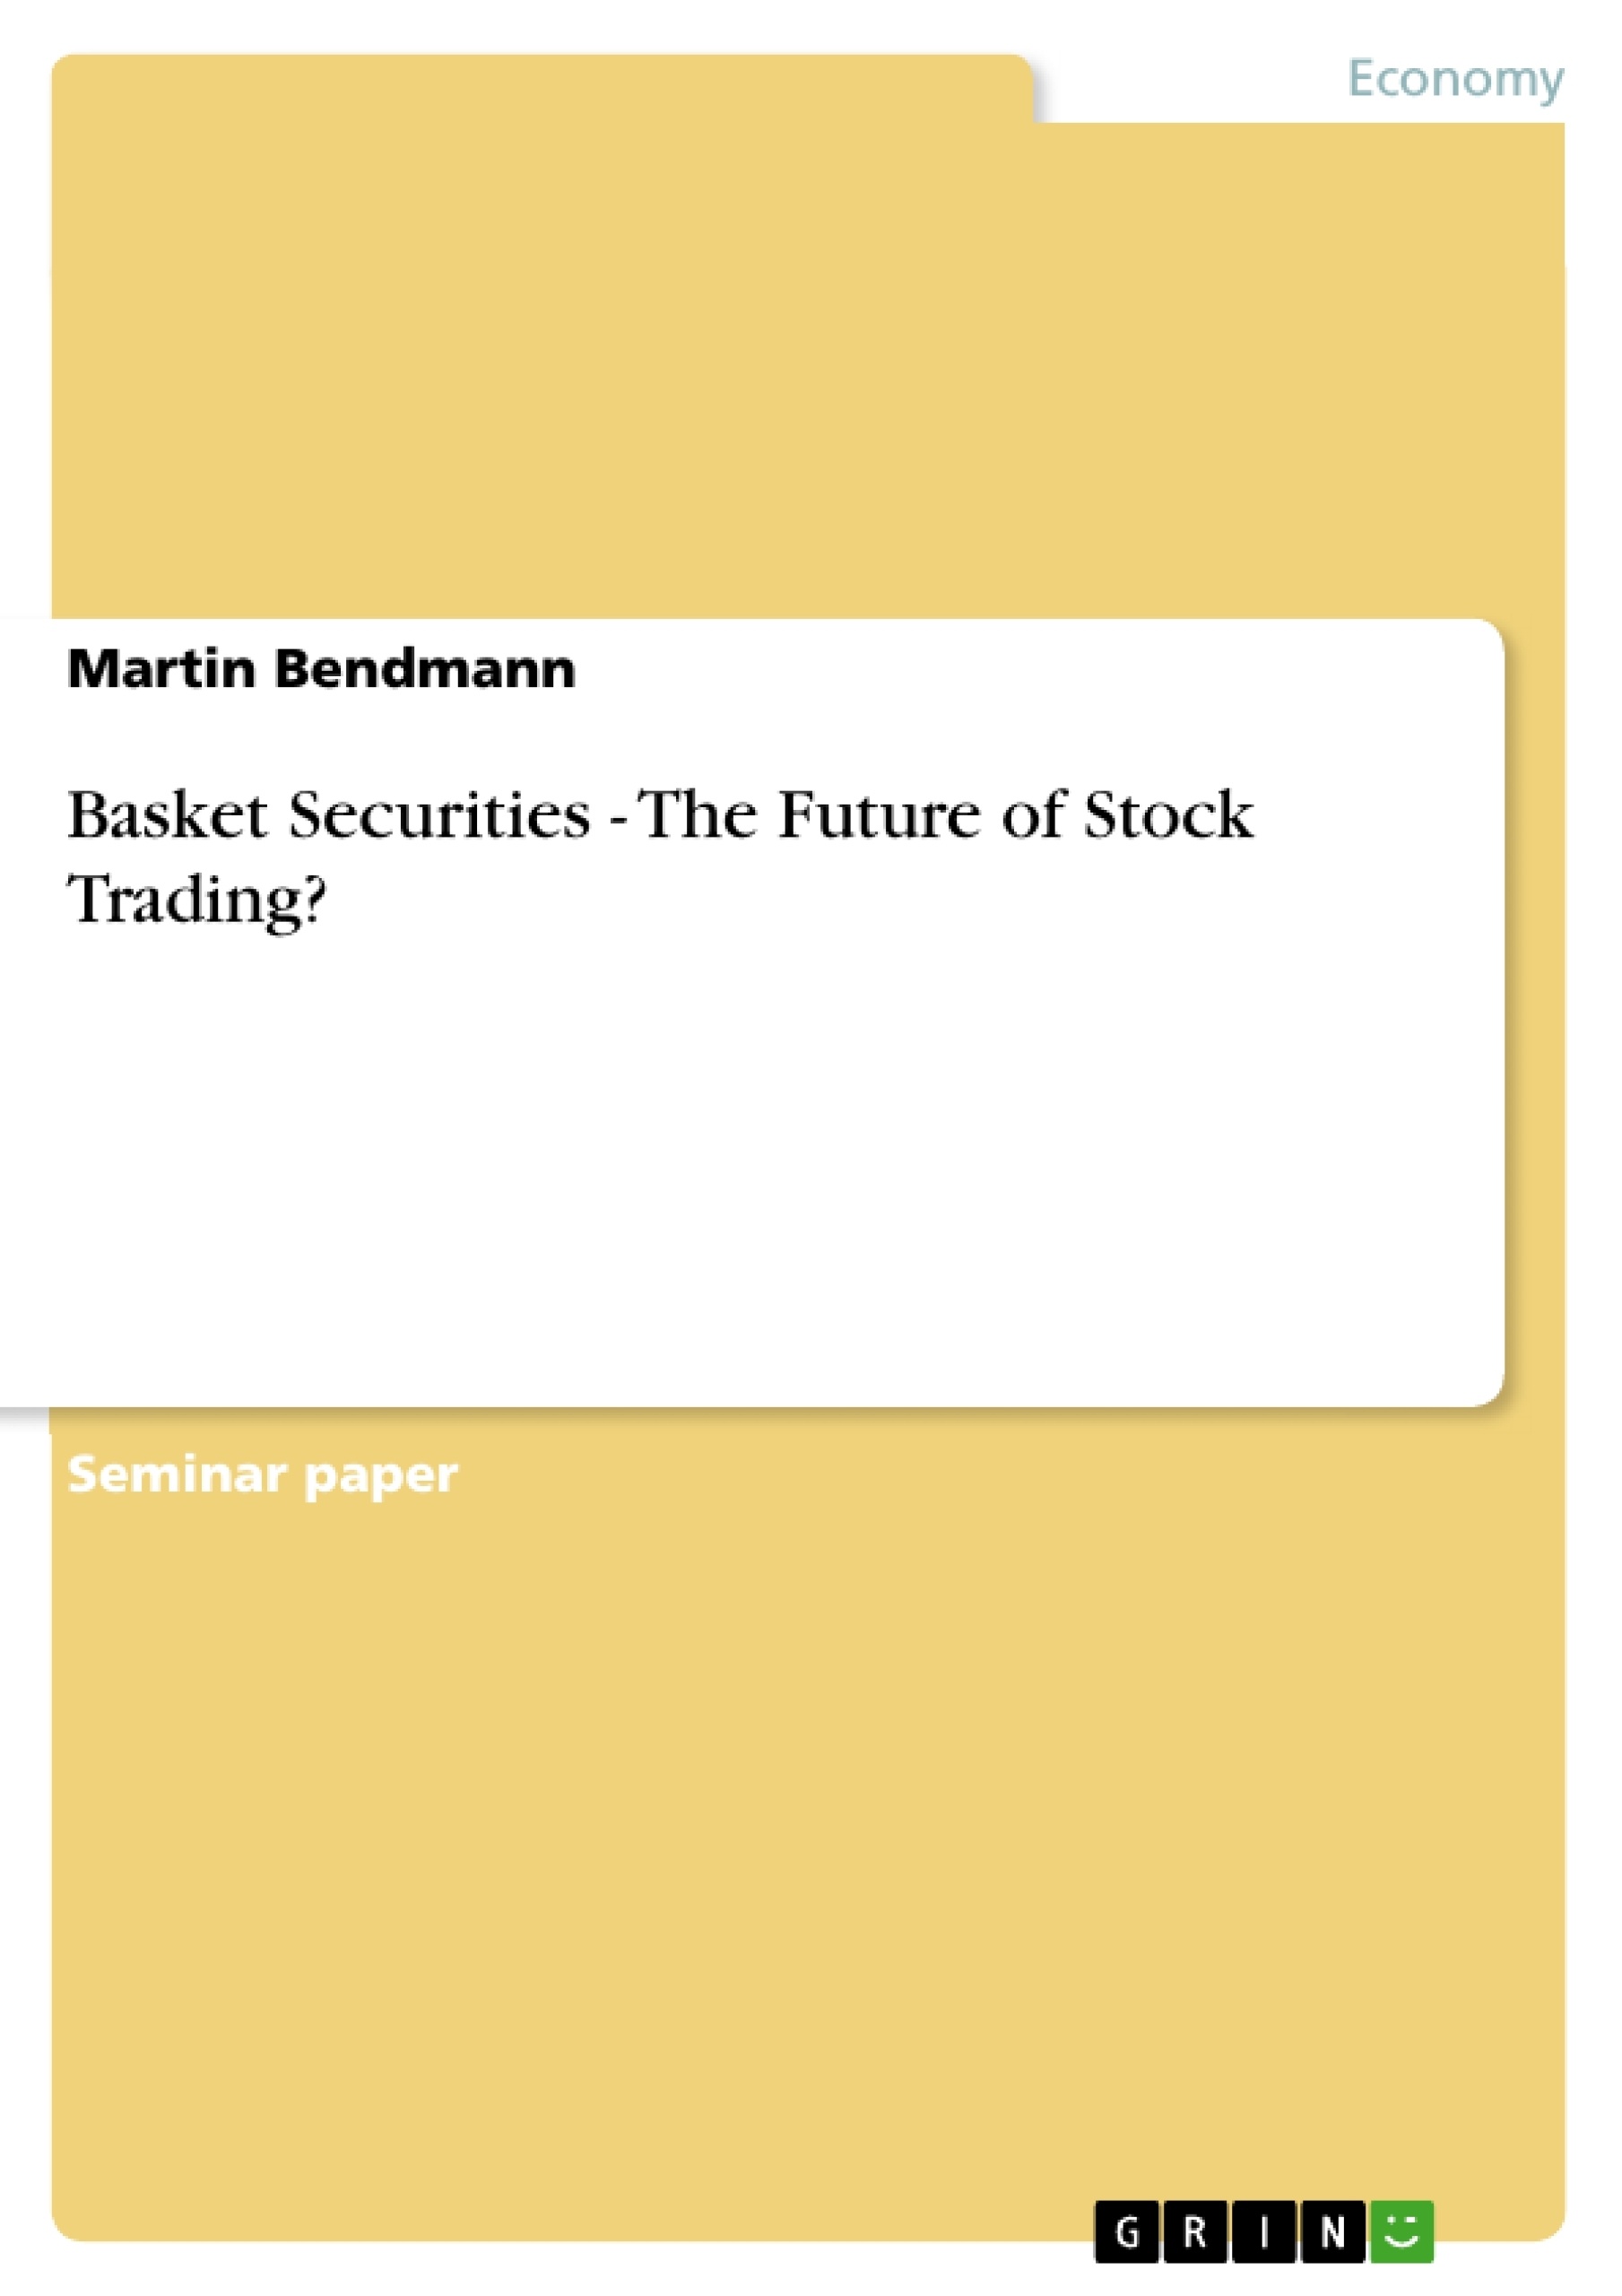 Titre: Basket Securities - The Future of Stock Trading?